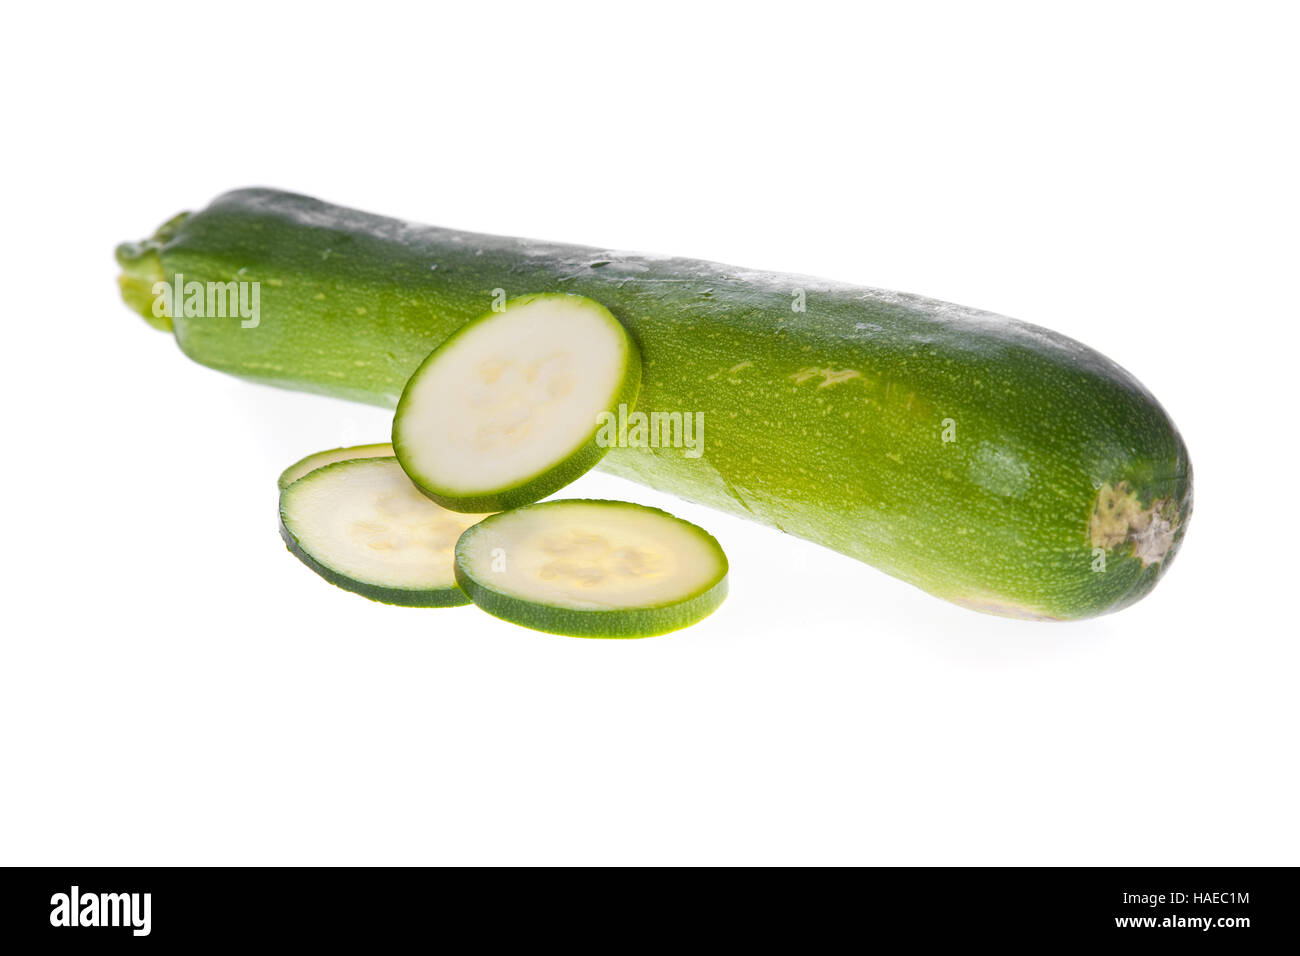 Sliced zucchini or courgette isolated on a white background. Stock Photo